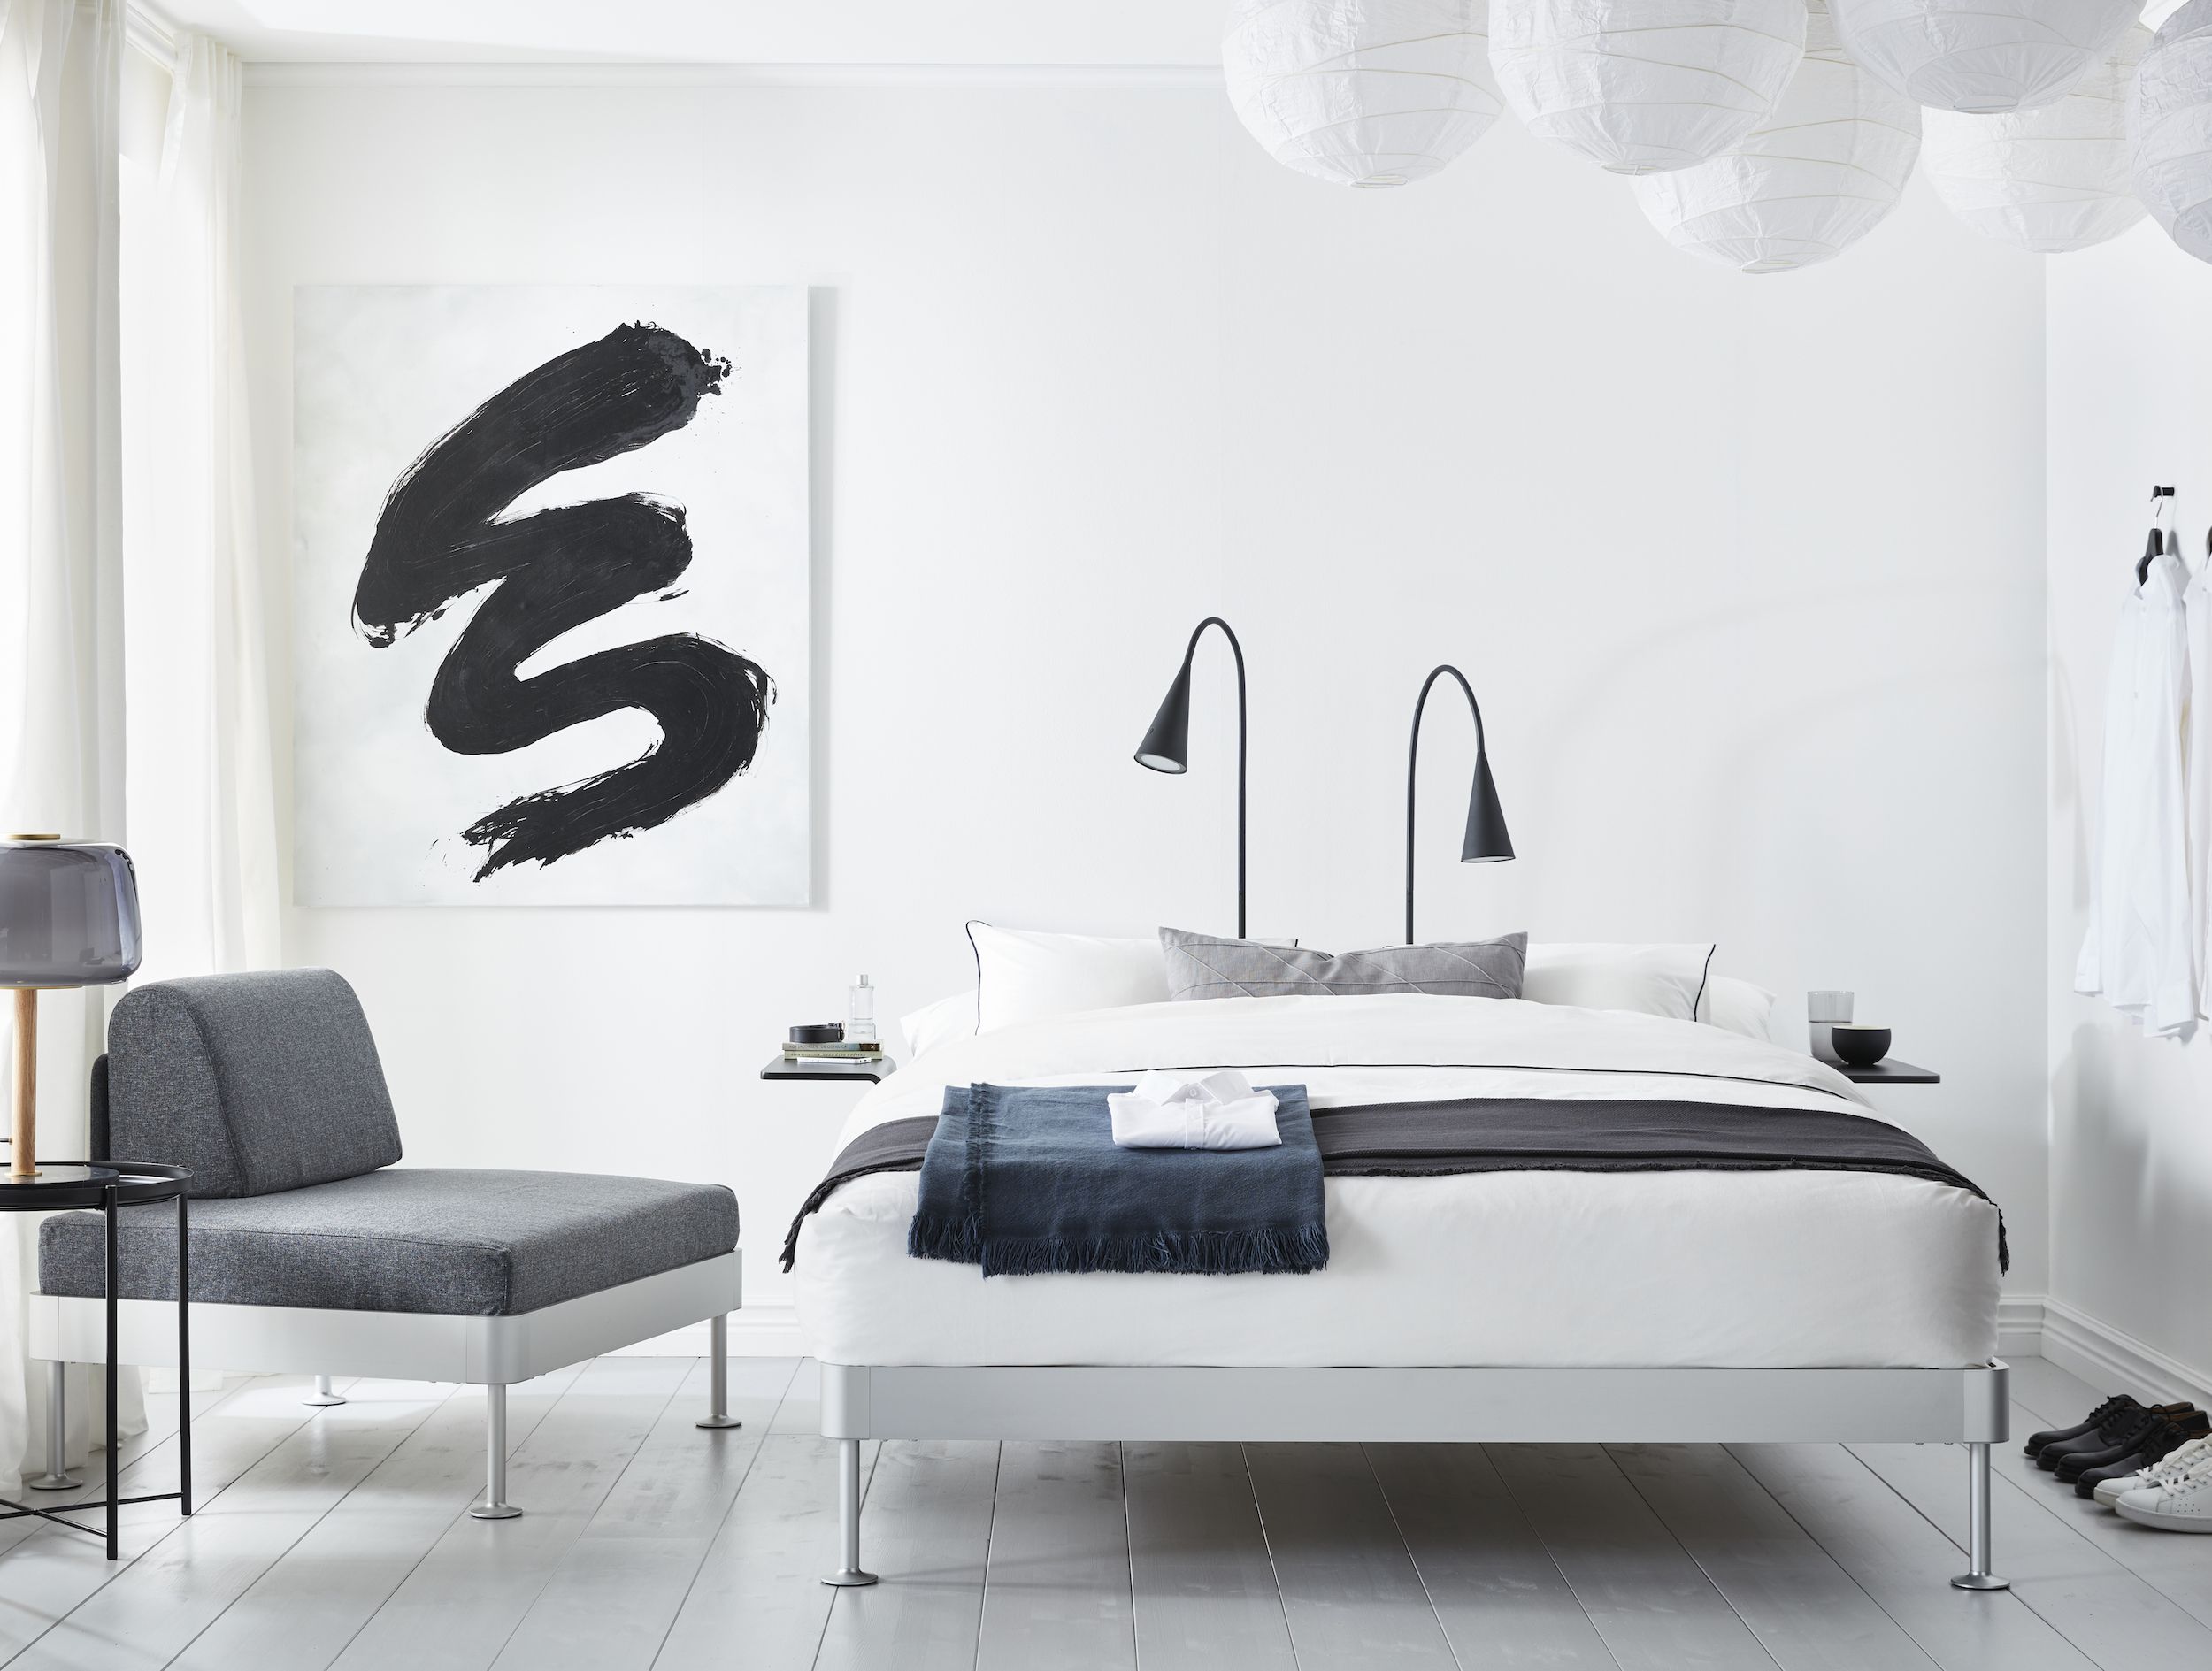 Afleiden Van toepassing Klem Tom Dixon Launched A Bedroom Line For Ikea That Makes Use of Every Inch of  Space You Have